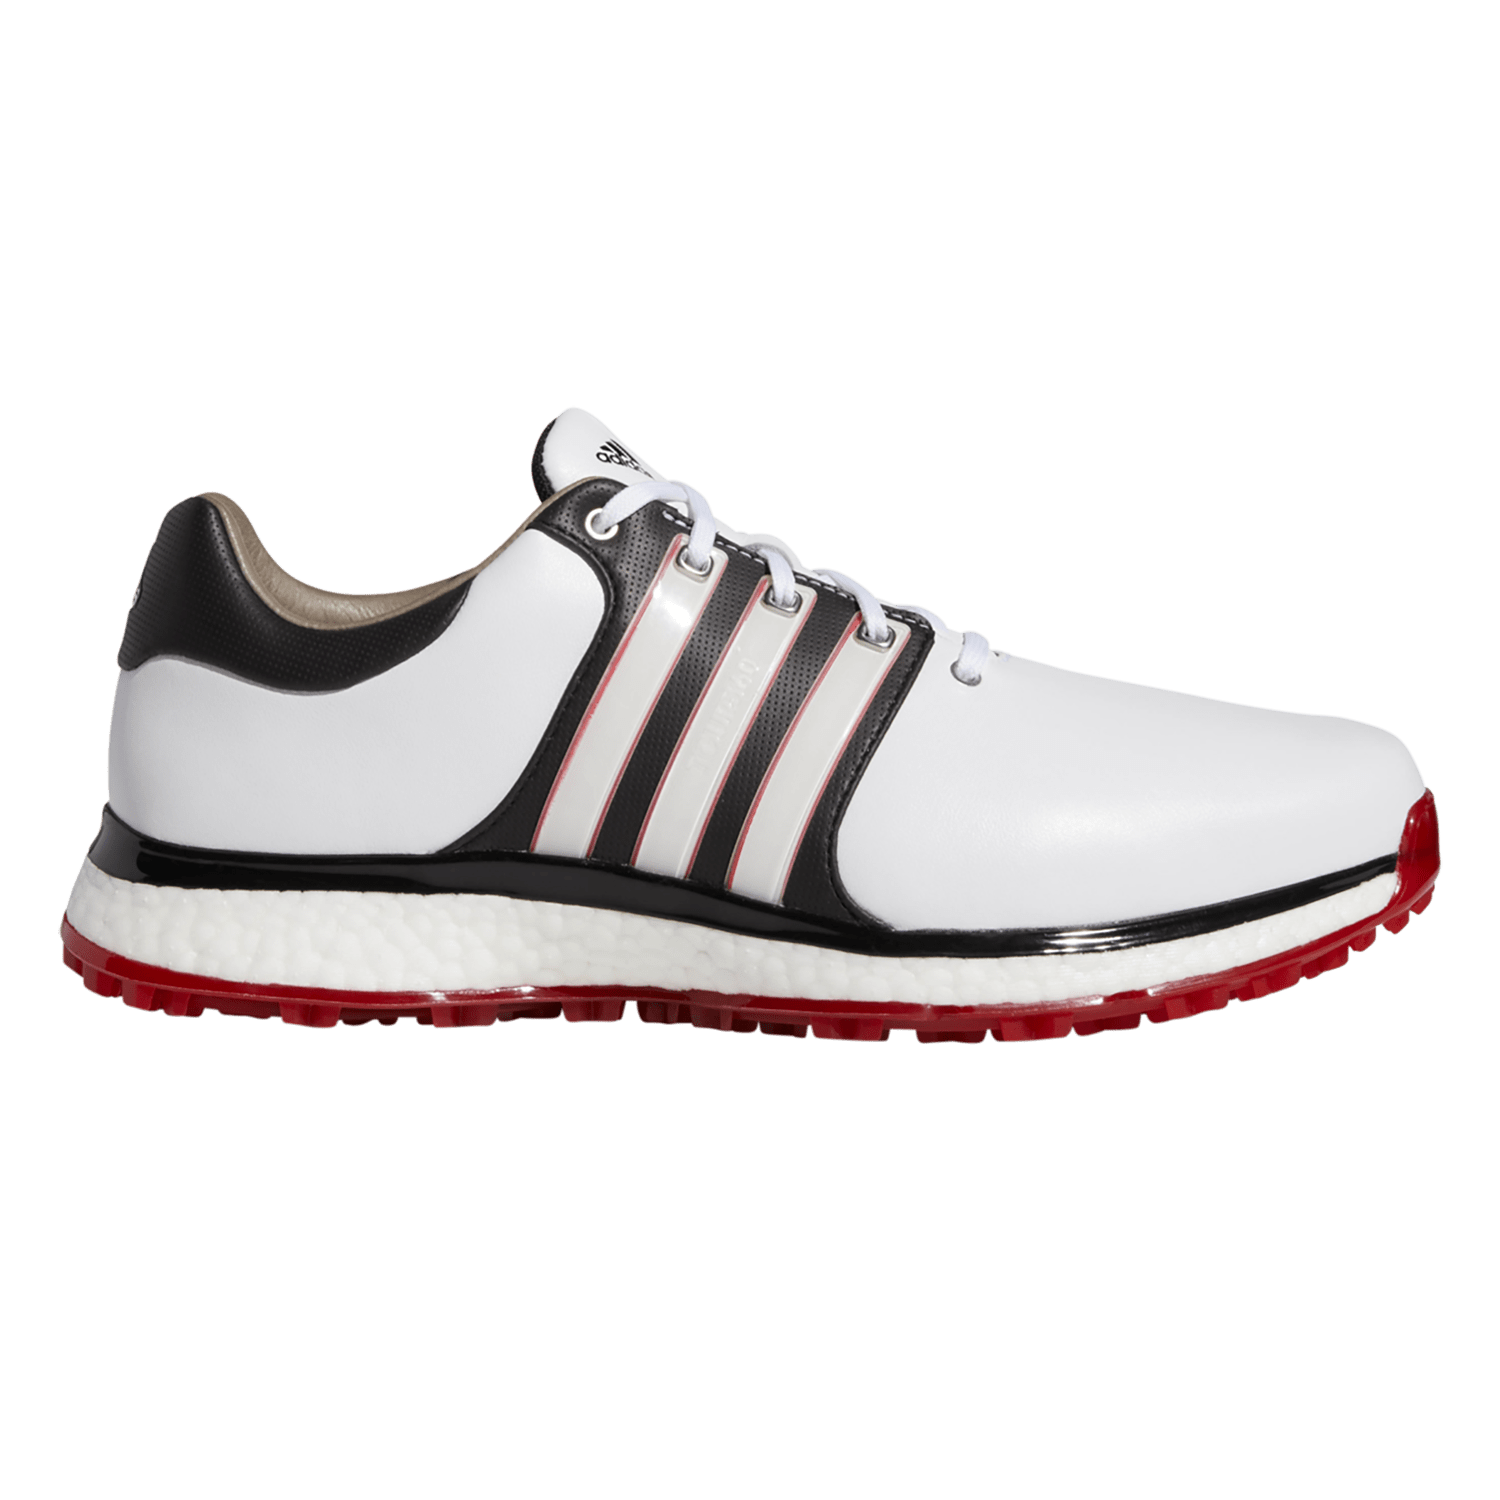 mens golf trainers sale